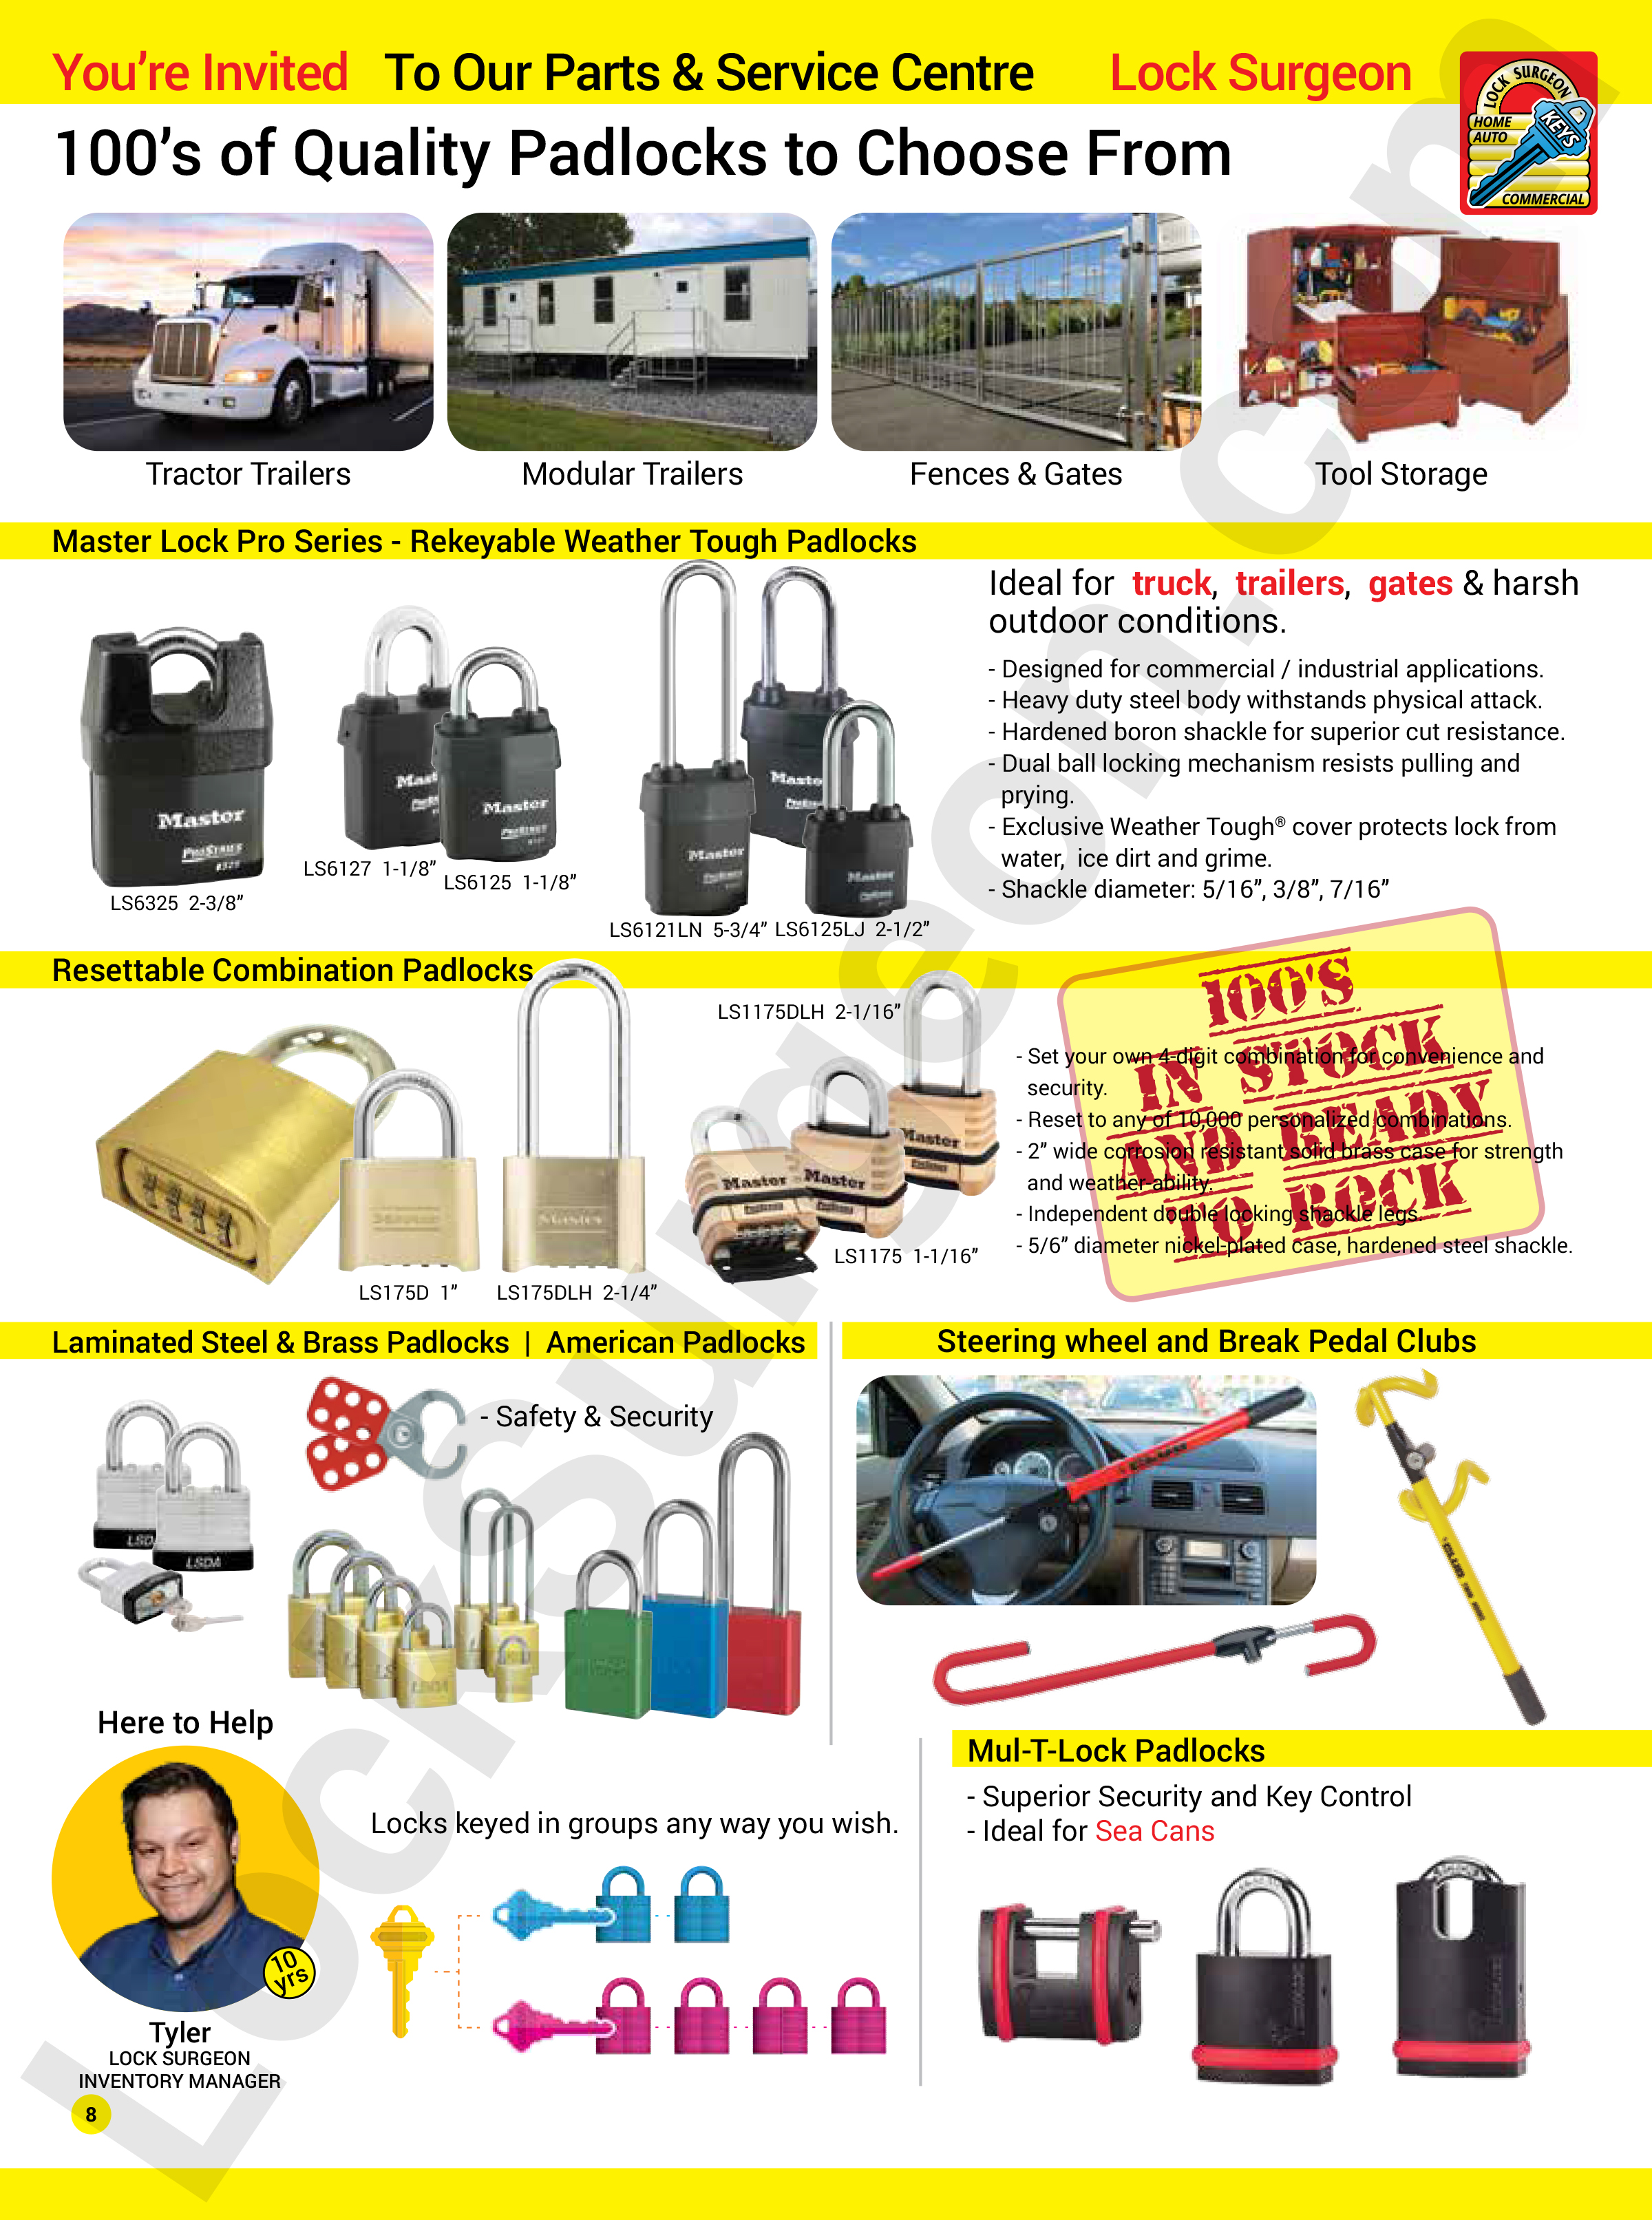 Hundreds of quality padlocks to choose from. Keyed alike or keyed different. Secure your property.